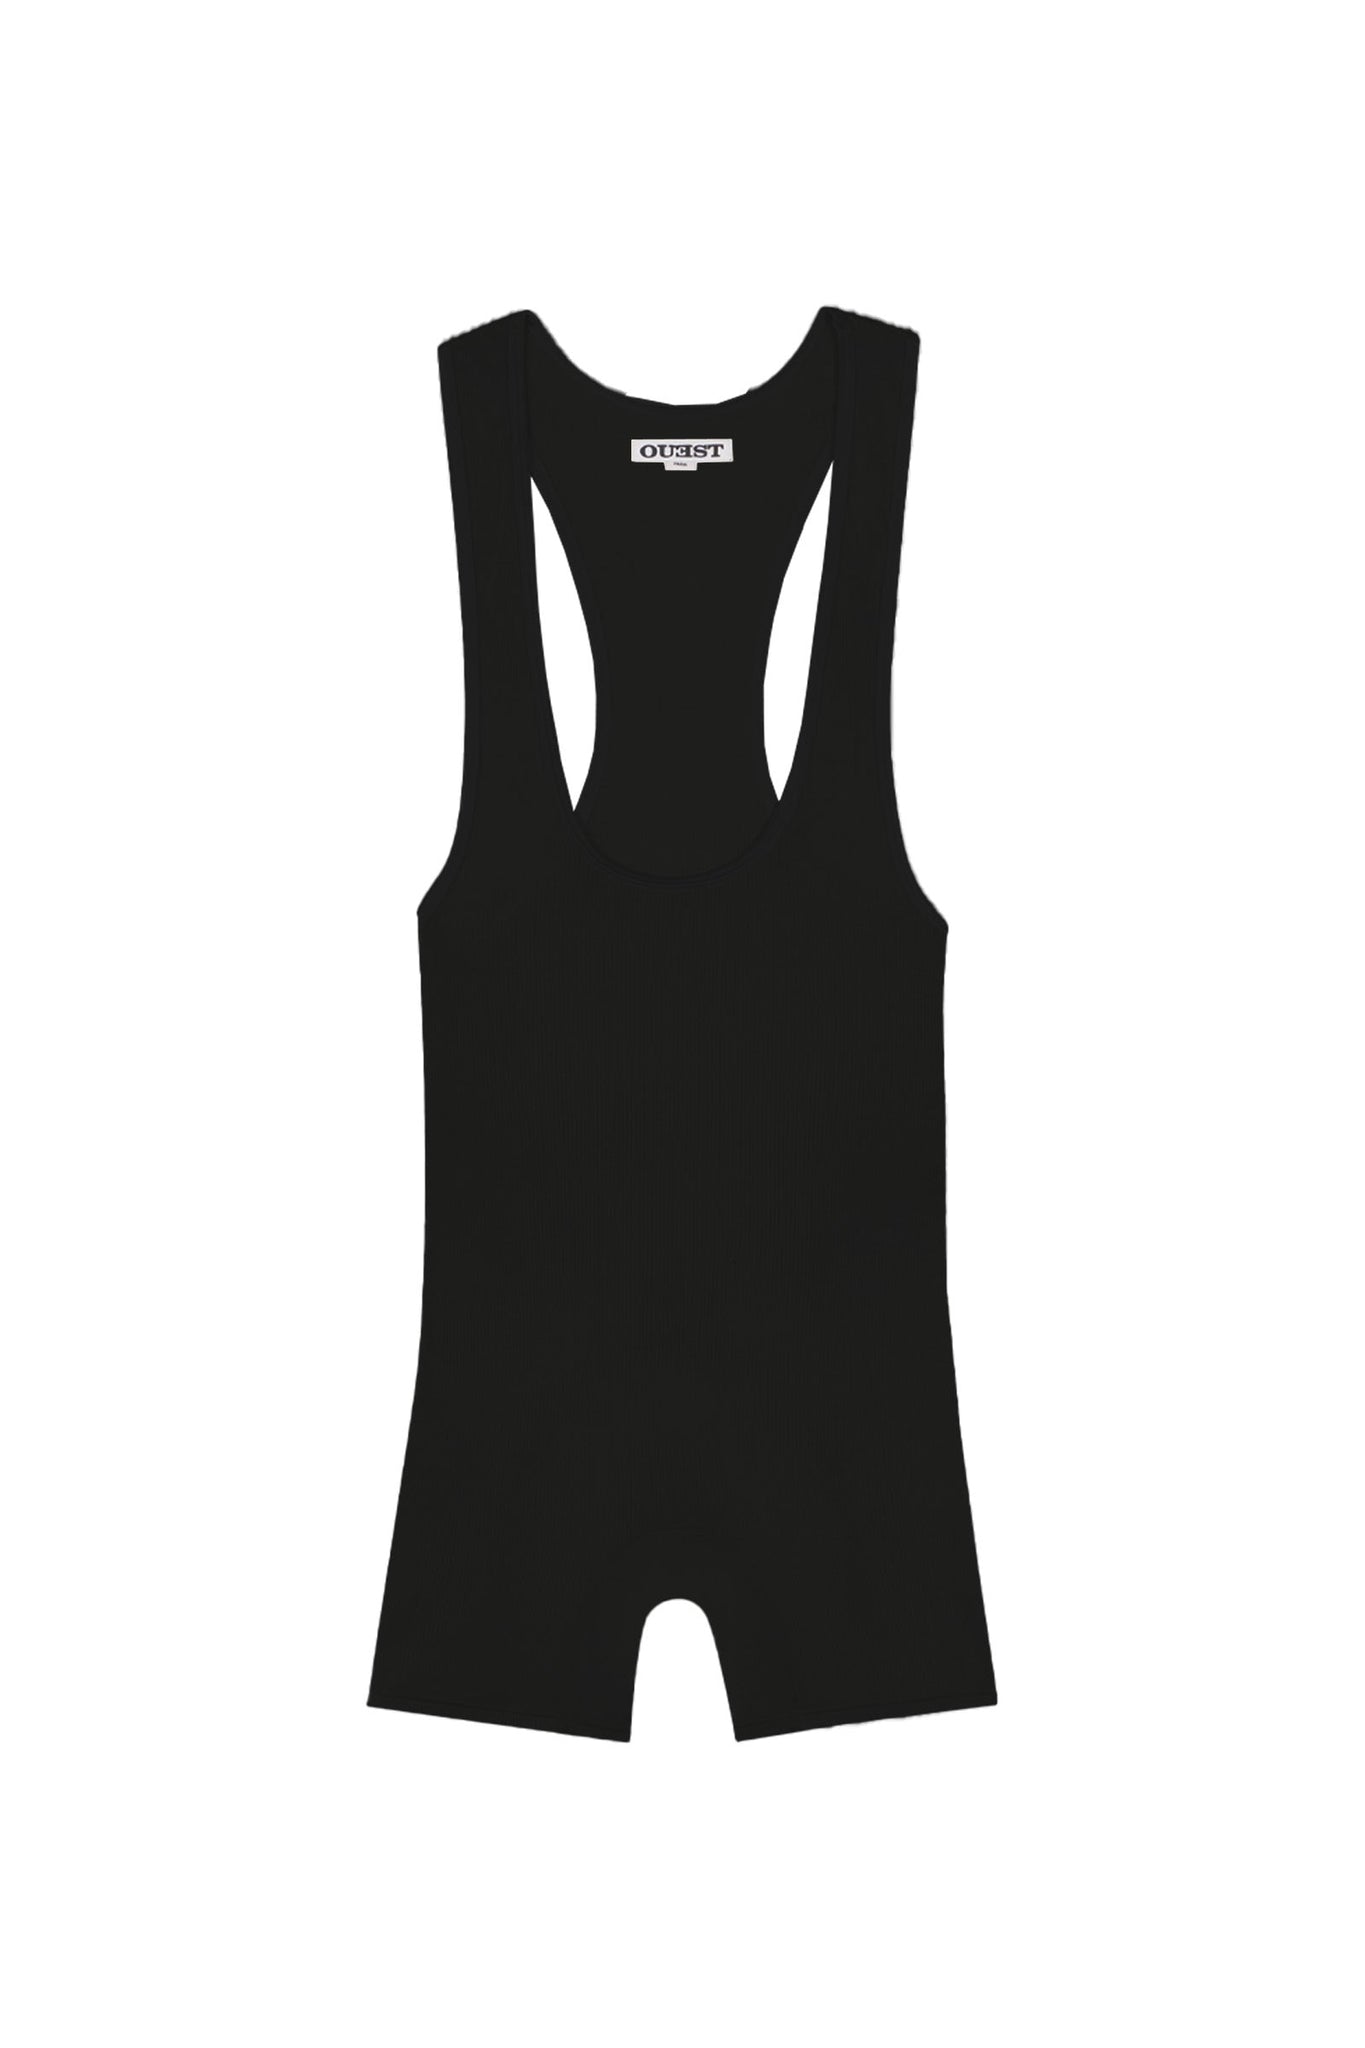 THE SINGLET IN BLACK RIBBED COTTON